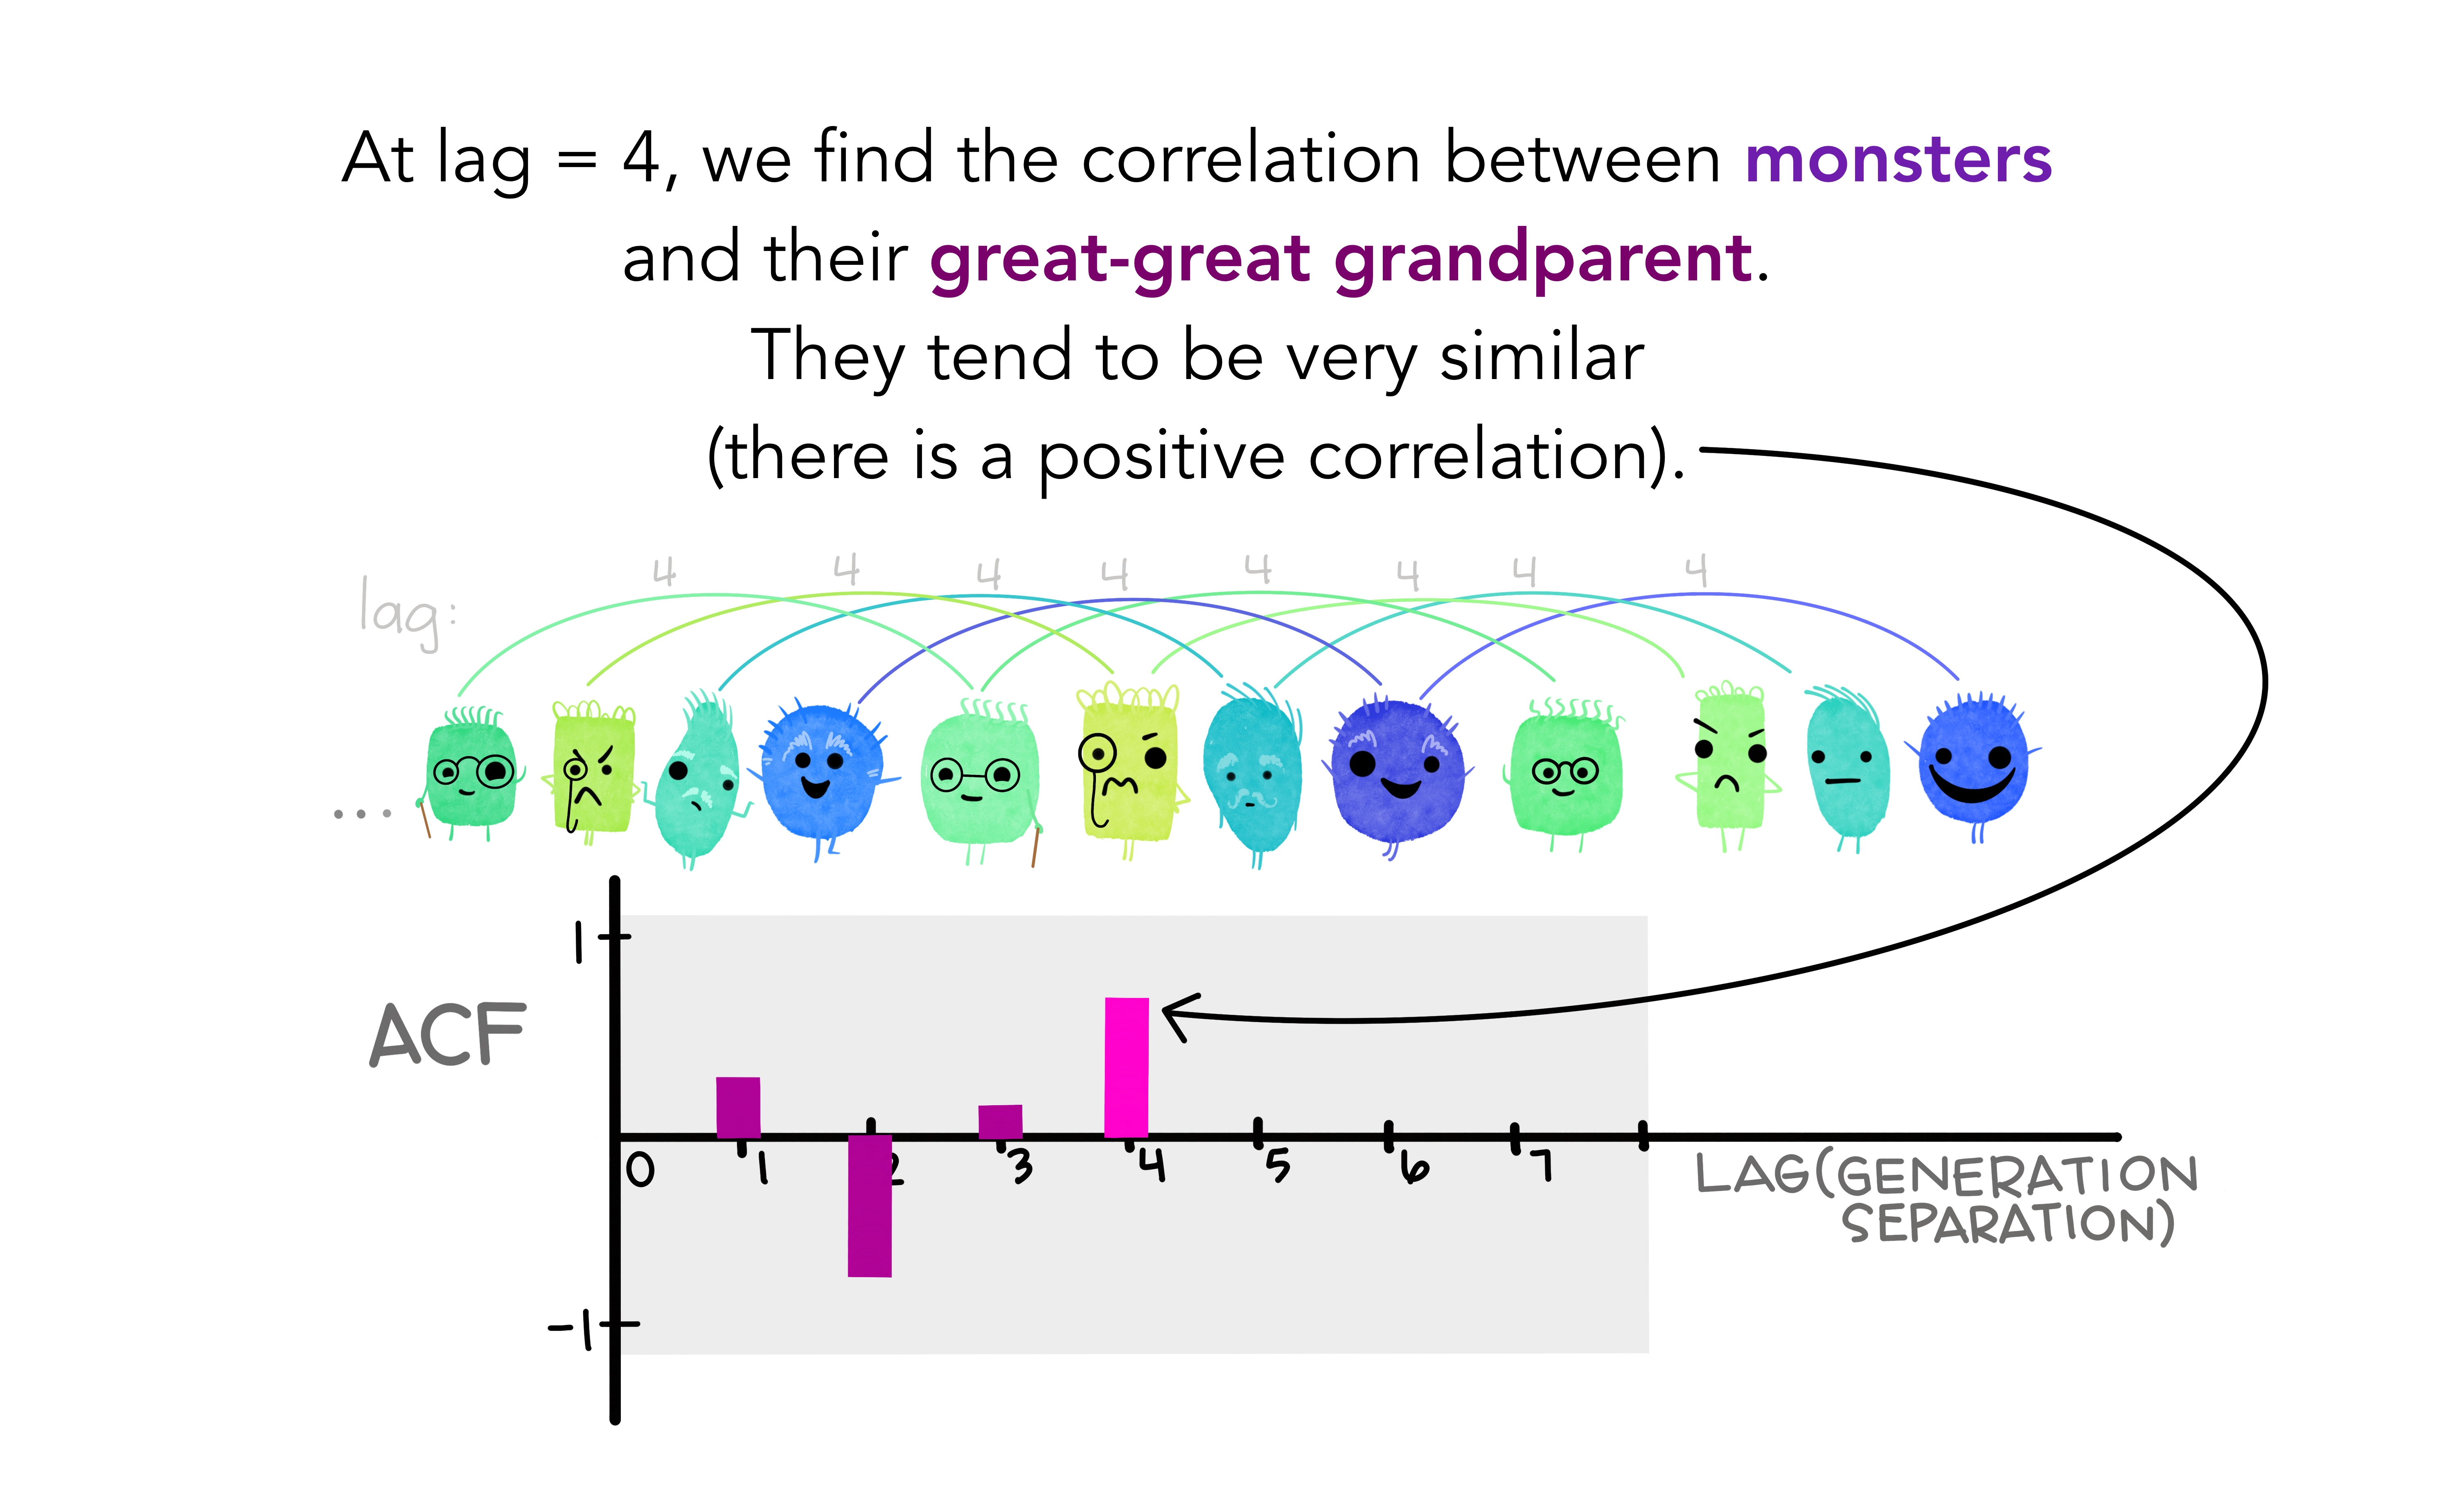 A long series of friendly looking monsters representing generations of their family. An arc with “4” is drawn between each monster and the one at a distance of 4 generations from it (lag = 4). Text reads “At lag = 4, we find the correlation between monsters and their great-great-grandparent. They tend to be verys similar (there is a positive correlation.)” The ACF plot now has an additional positive bar at Lag = 4, indicating the positive correlation between each monster and their great-great-grandparent.